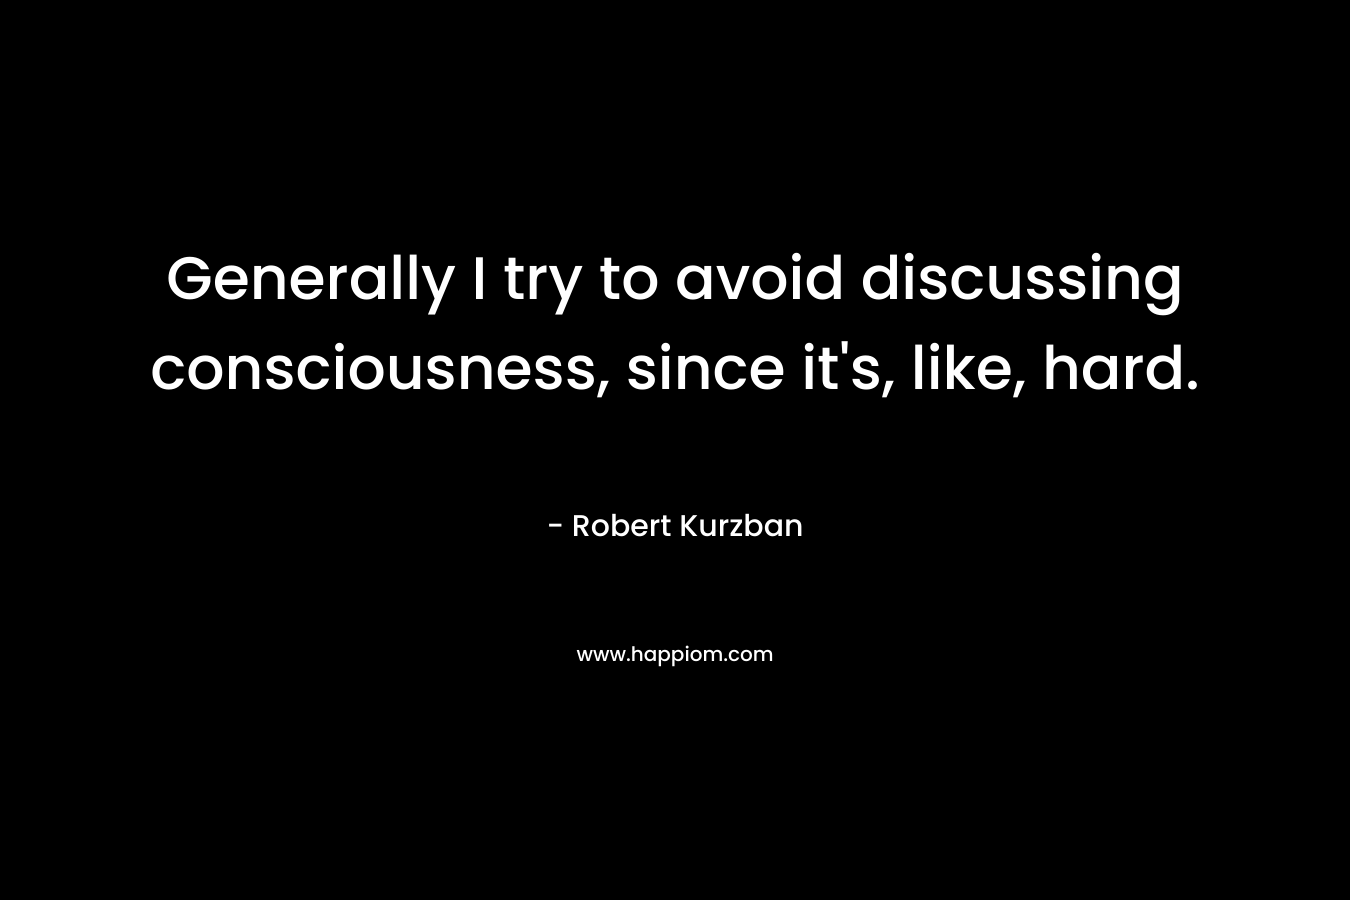 Generally I try to avoid discussing consciousness, since it’s, like, hard. – Robert Kurzban